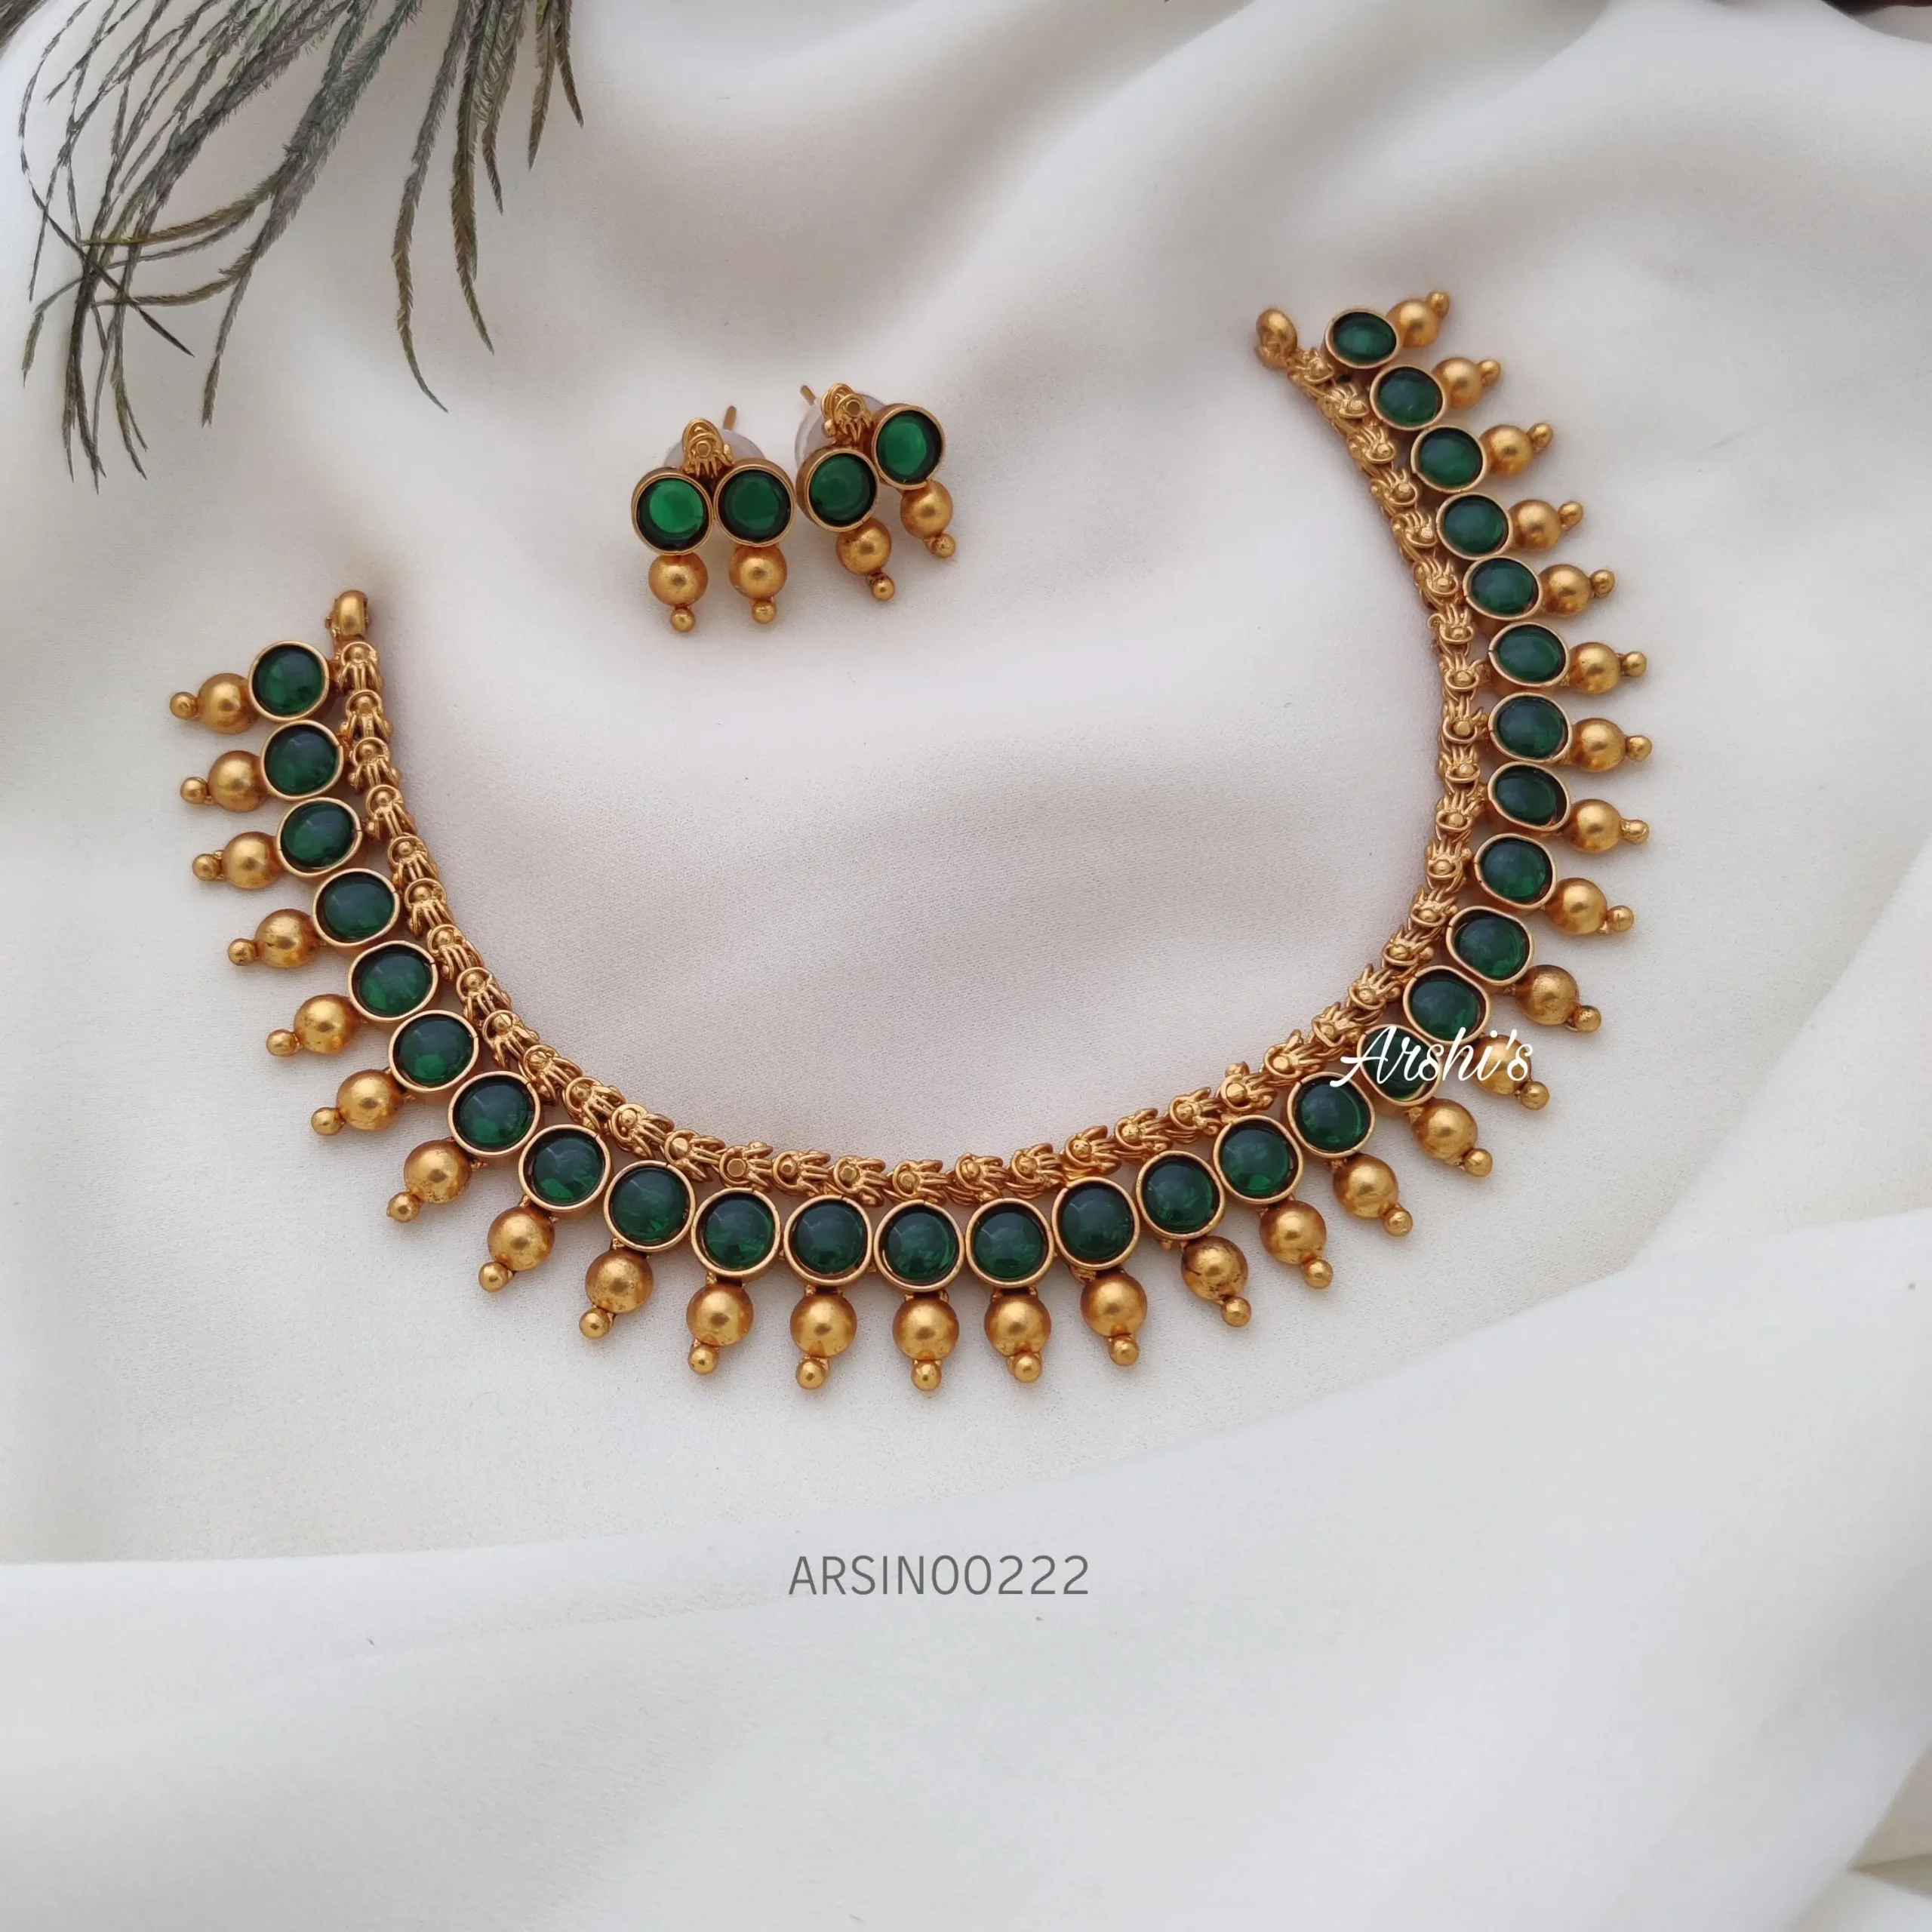 Vintage style Peacock green layered choker pendant necklace at ₹2450 |  Azilaa